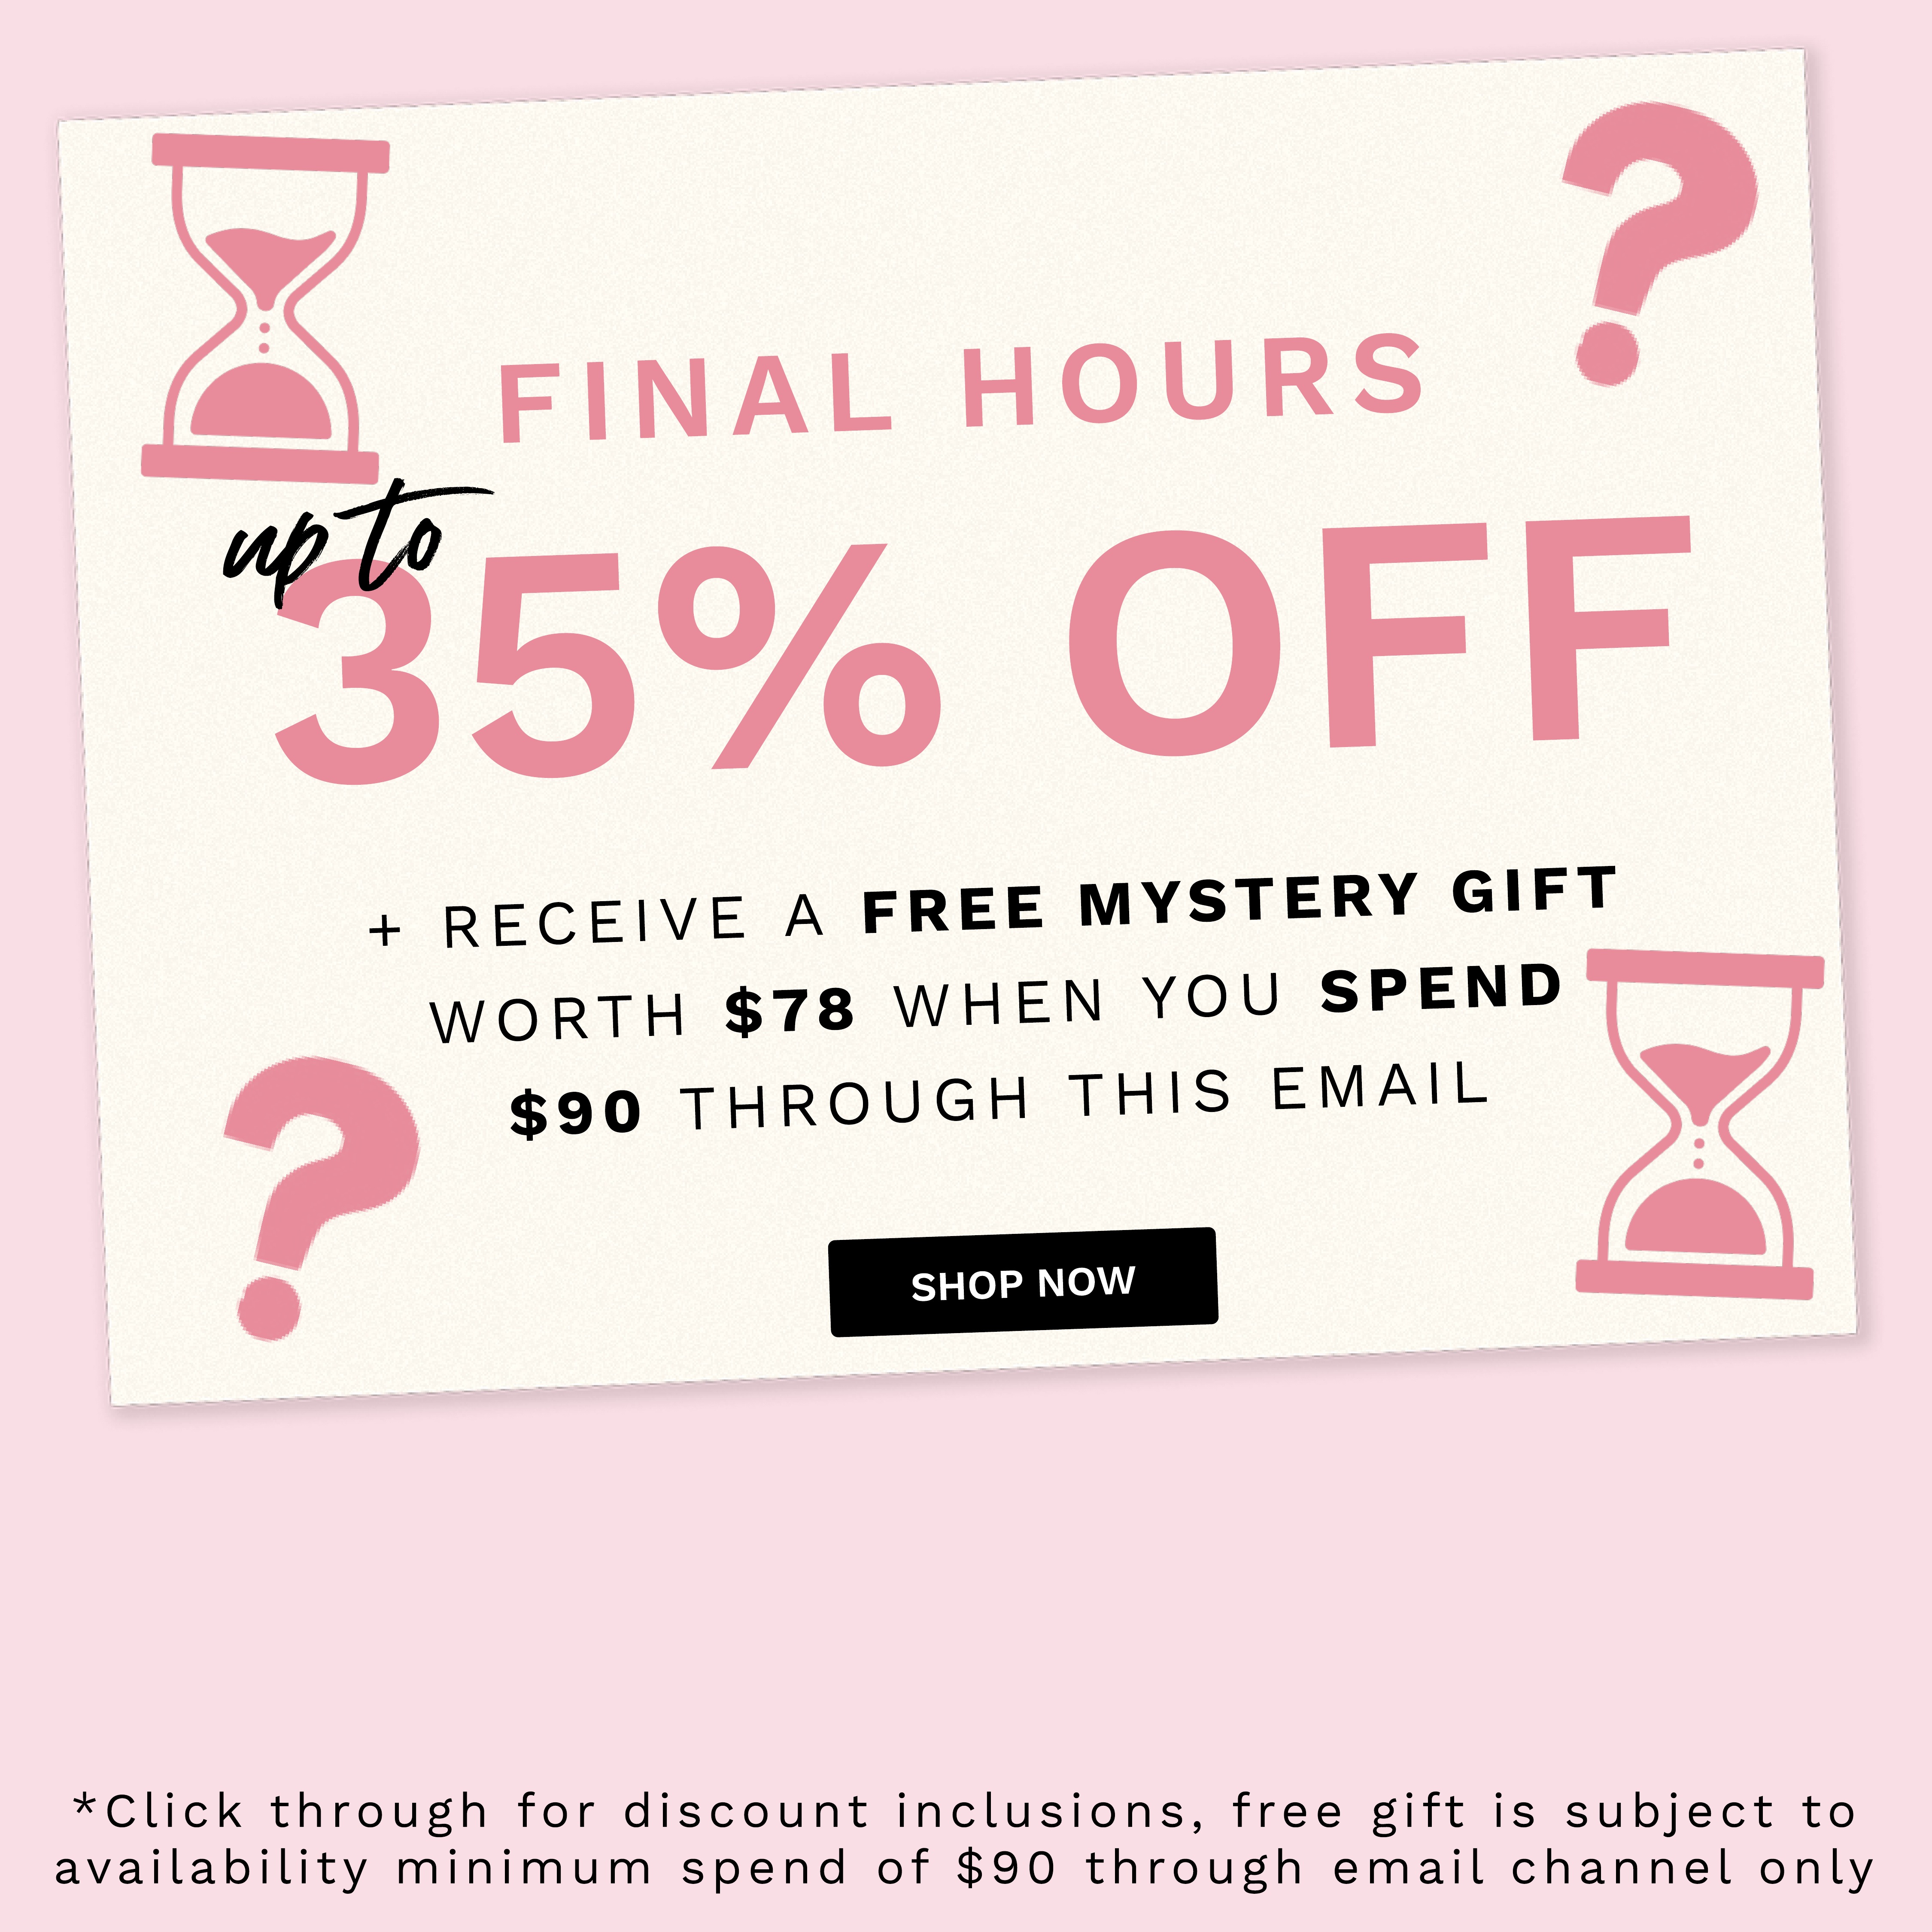  FINAL HOURS @ RECEIVE A FREE MYSTERY GIFT WORTH $78 WHEN YOU SPEND $90 THROUGH THIS EMAIL *Click through for discount inclusions, free gift is subject to availability minimum spend of $90 through email channel only 